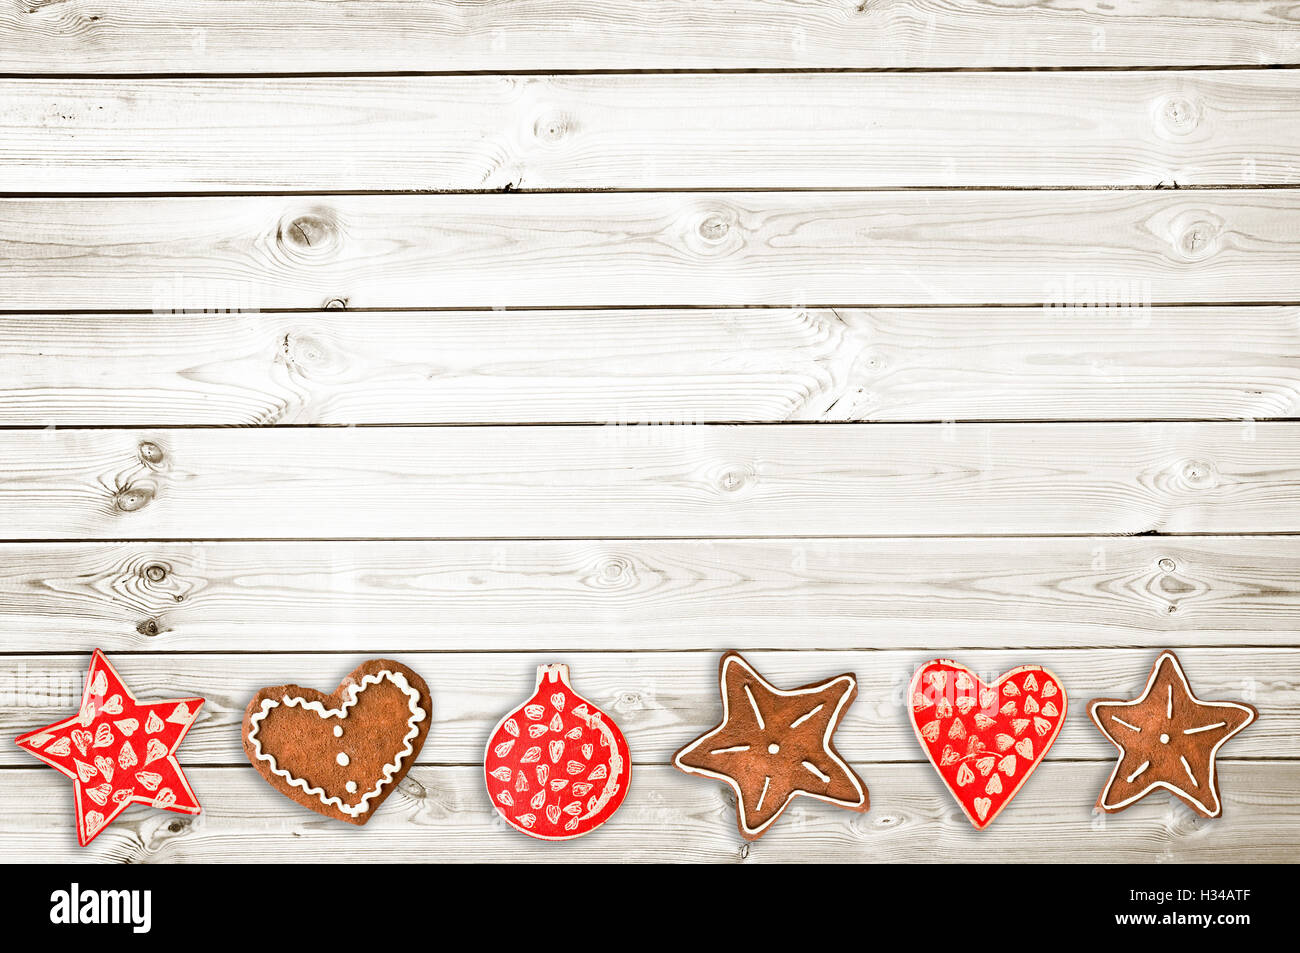 Ginger bread cookies and Christmas ornaments on white wooden planks background Stock Photo